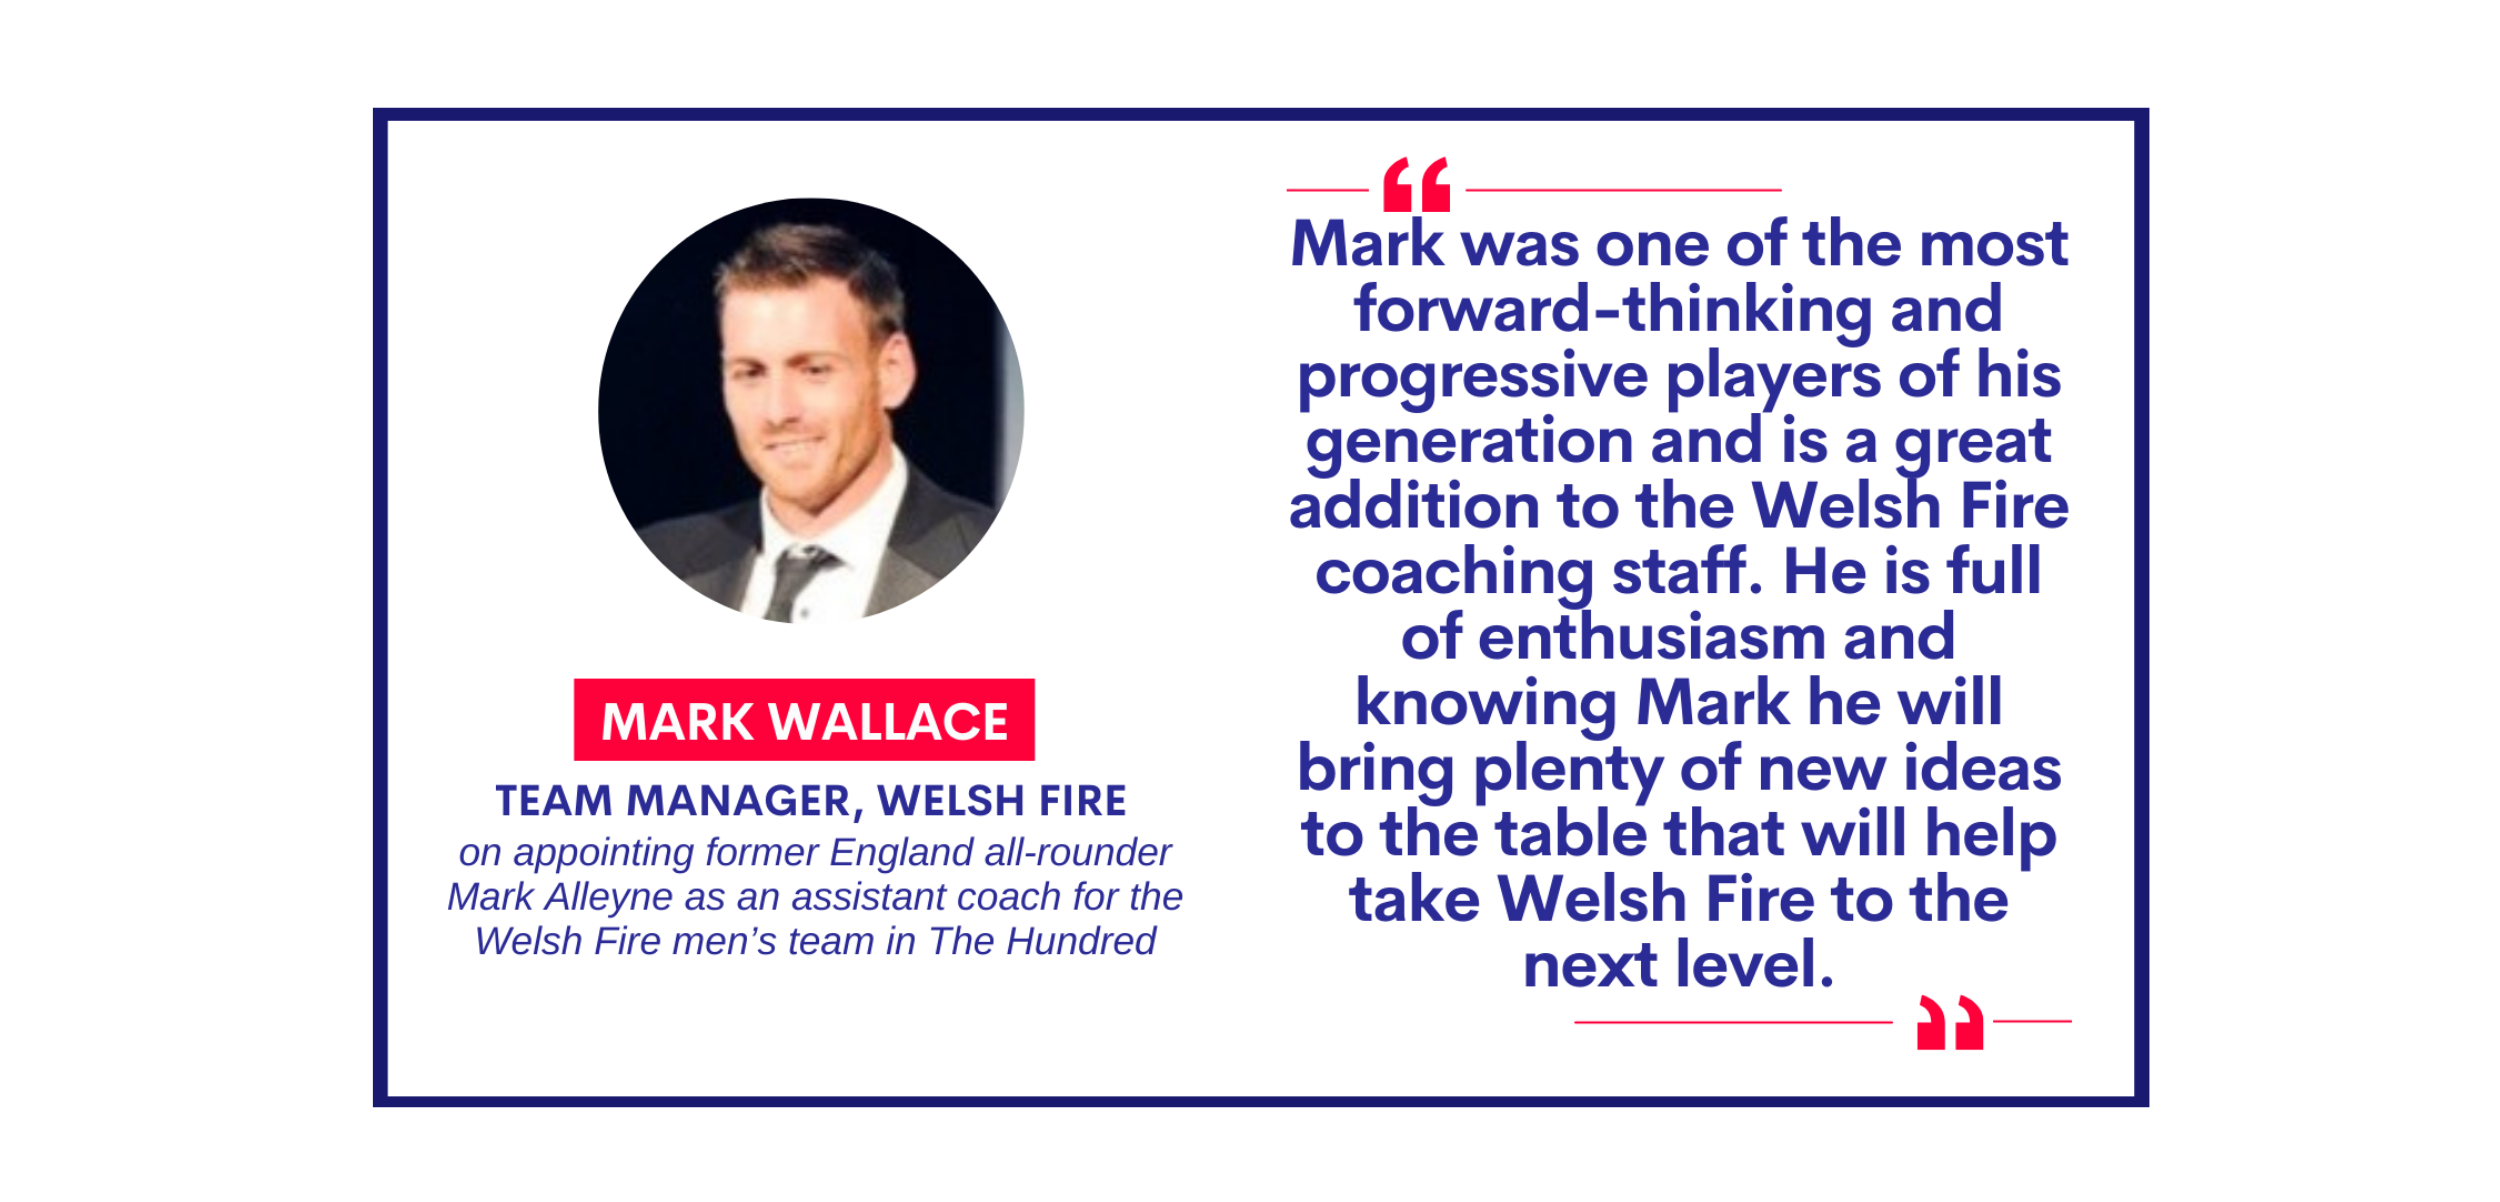 Mark Wallace, Team Manager, Welsh Fire on appointing former England all-rounder Mark Alleyne as an assistant coach for the Welsh Fire men’s team in The Hundred